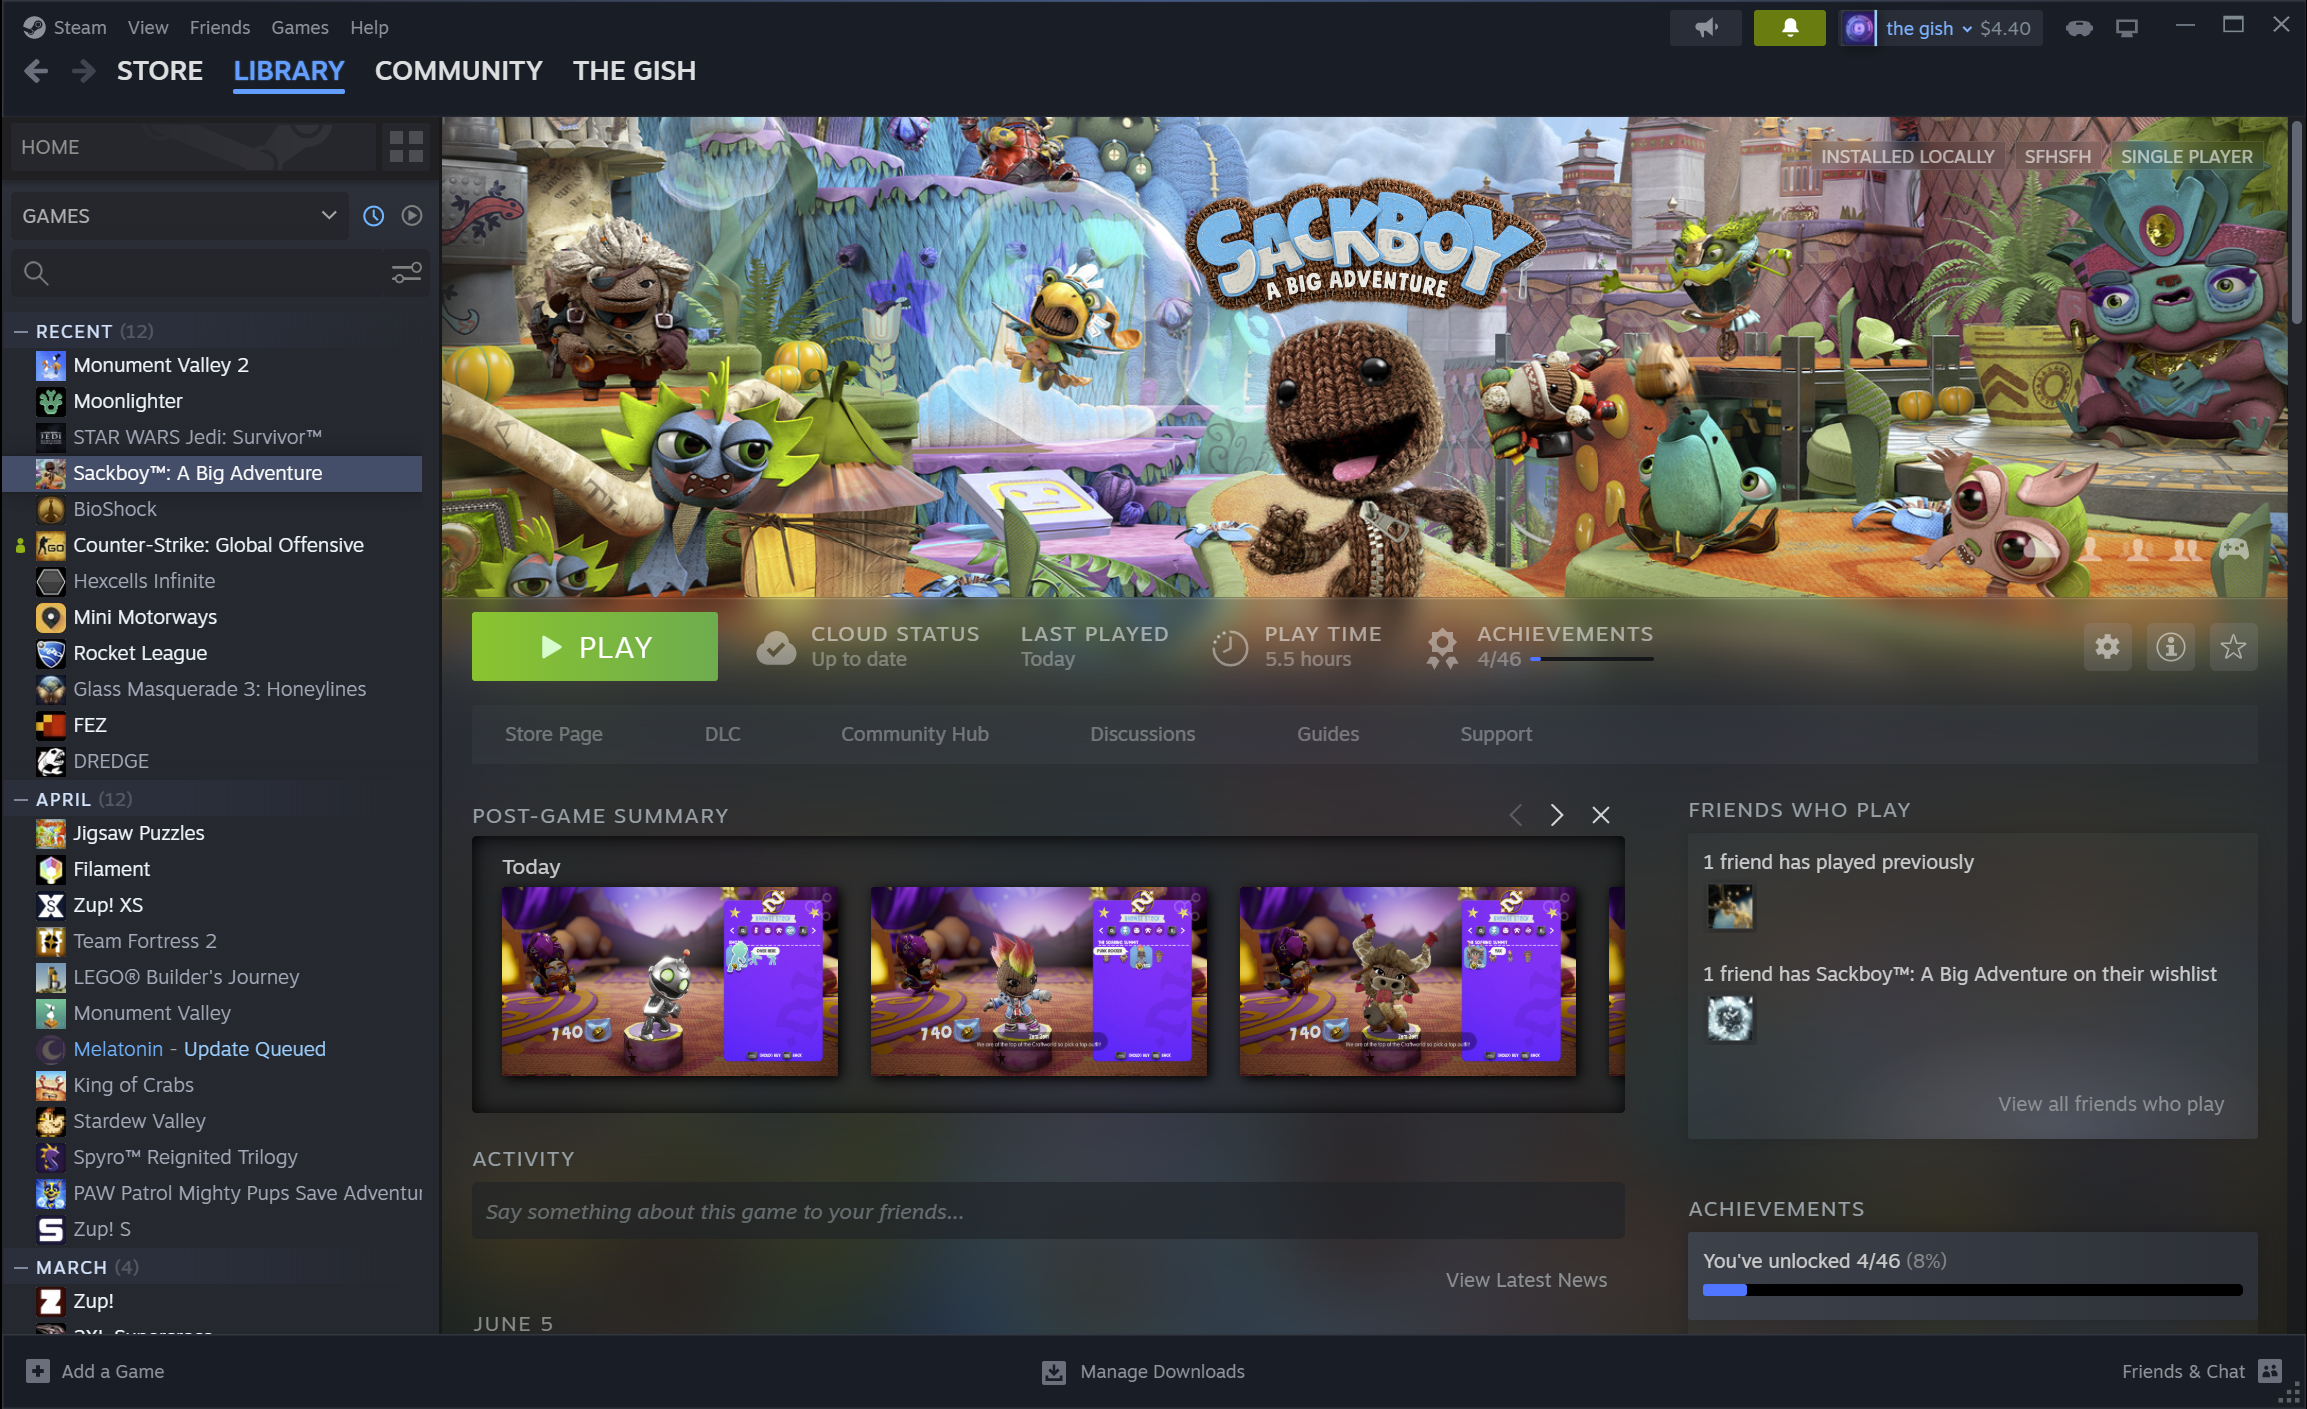 Valve has updated the Steam Charts page with a new, sleek design